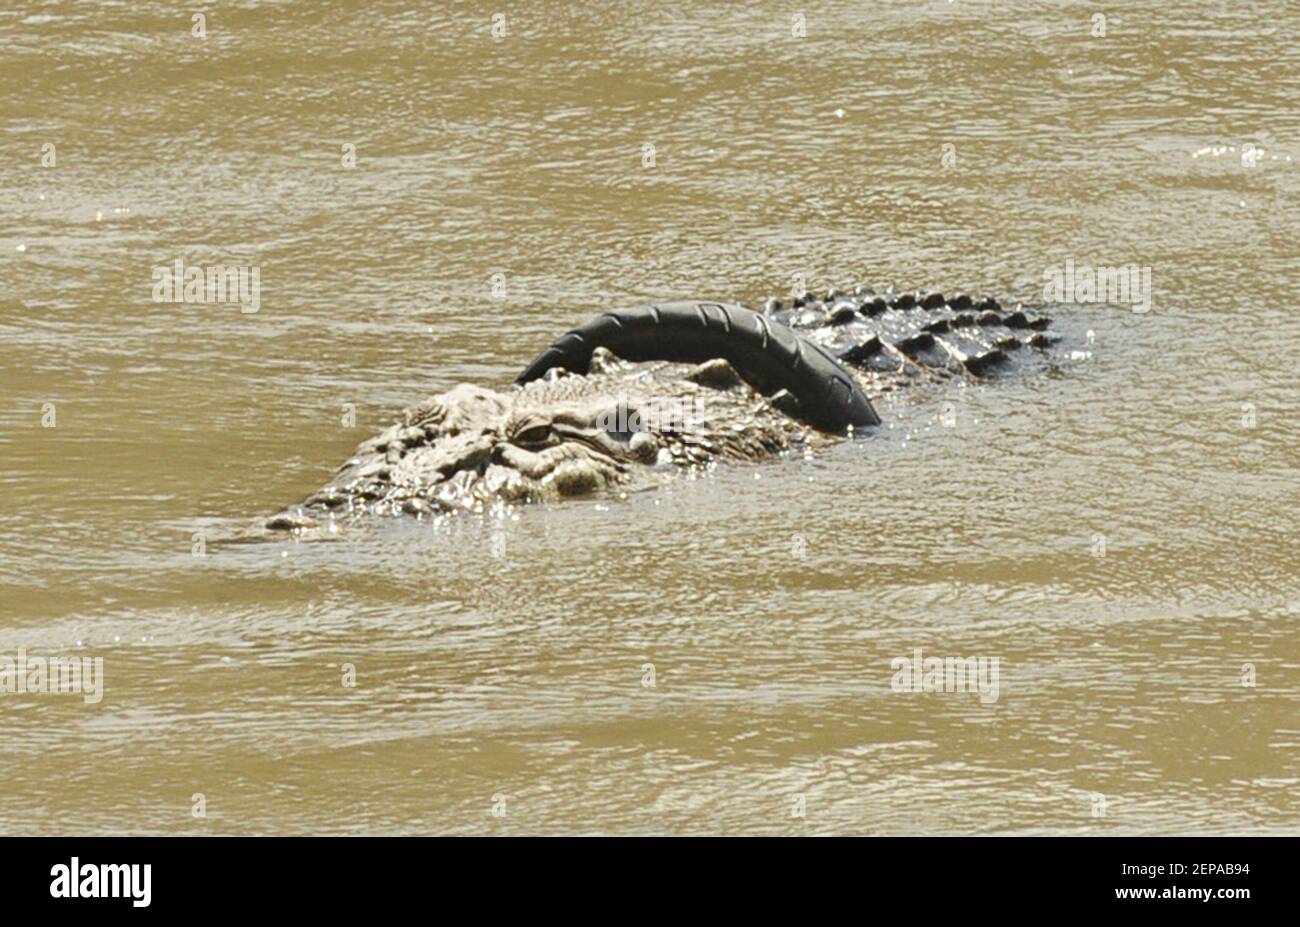 A crocodile with a used motorcycle tyre around its neck as seen on a river  in Palu, Central Sulawesi province, Indonesia, on 23 November 2019.  Conservation officials are racing to rescue a